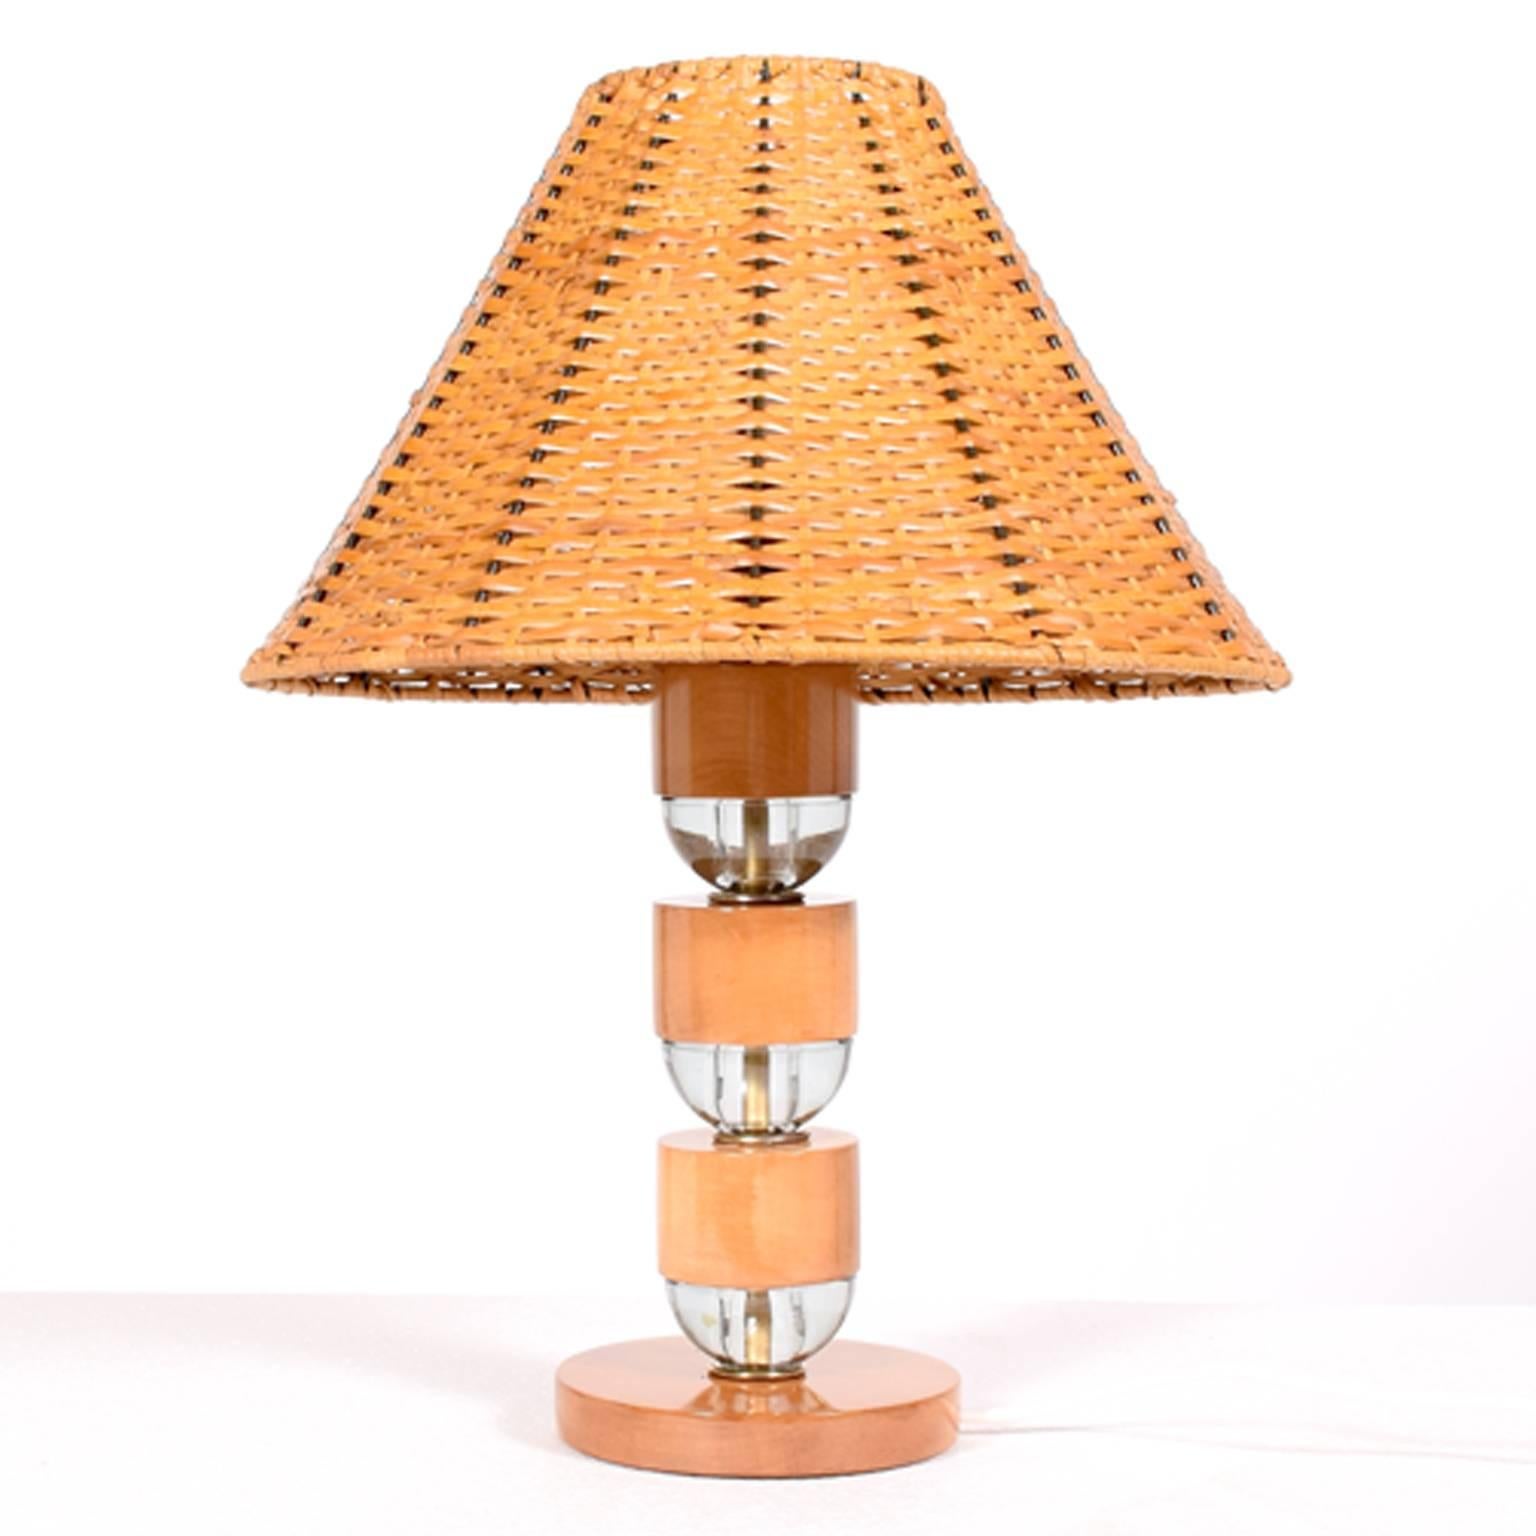 Base made of solid maple and glass spacers with cane lampshade. Wood has been restored, rest is all original.